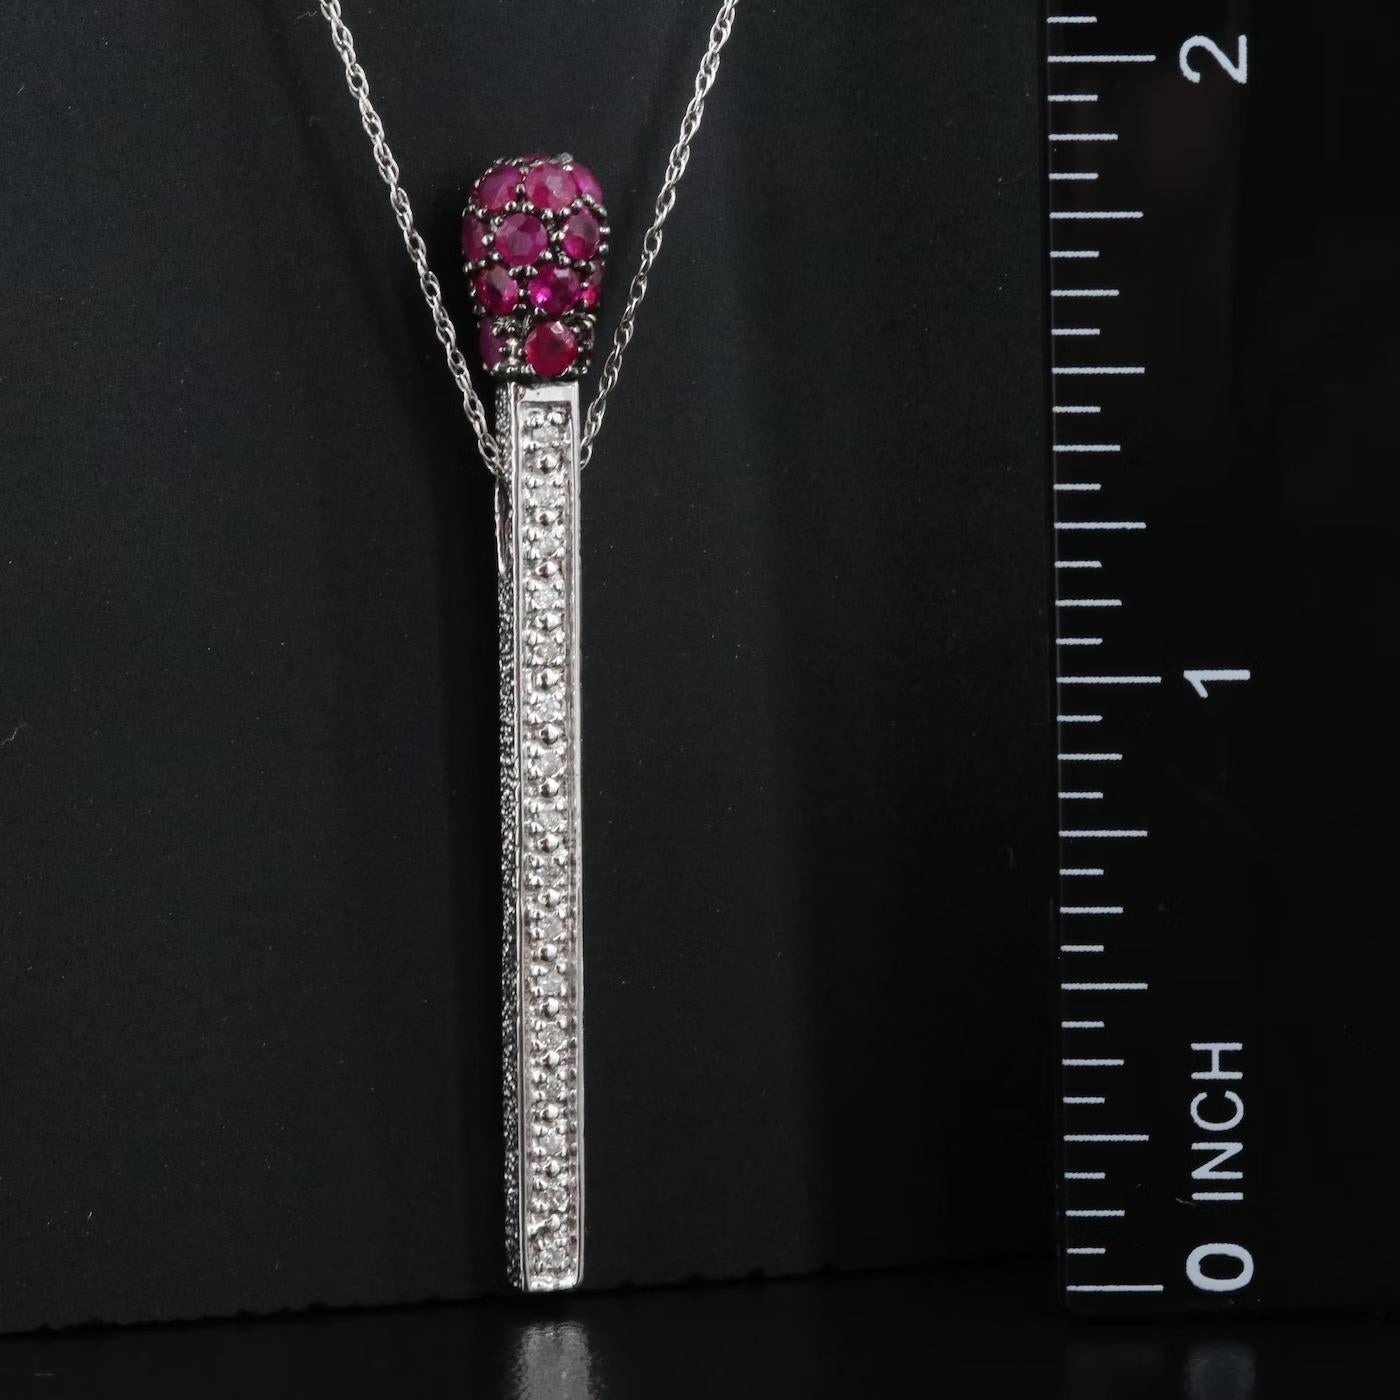 Designer Necklace, stamped and hallmarked 14K JCR (John C Rinker)

NEW with Tags, Tag price $3950

1.05 CWT Natural Diamond & Natural Ruby, TOP QUALITY      

14K White Gold, stamped 14K

About 2 inches in drop length

3D Matchstick fancy design,